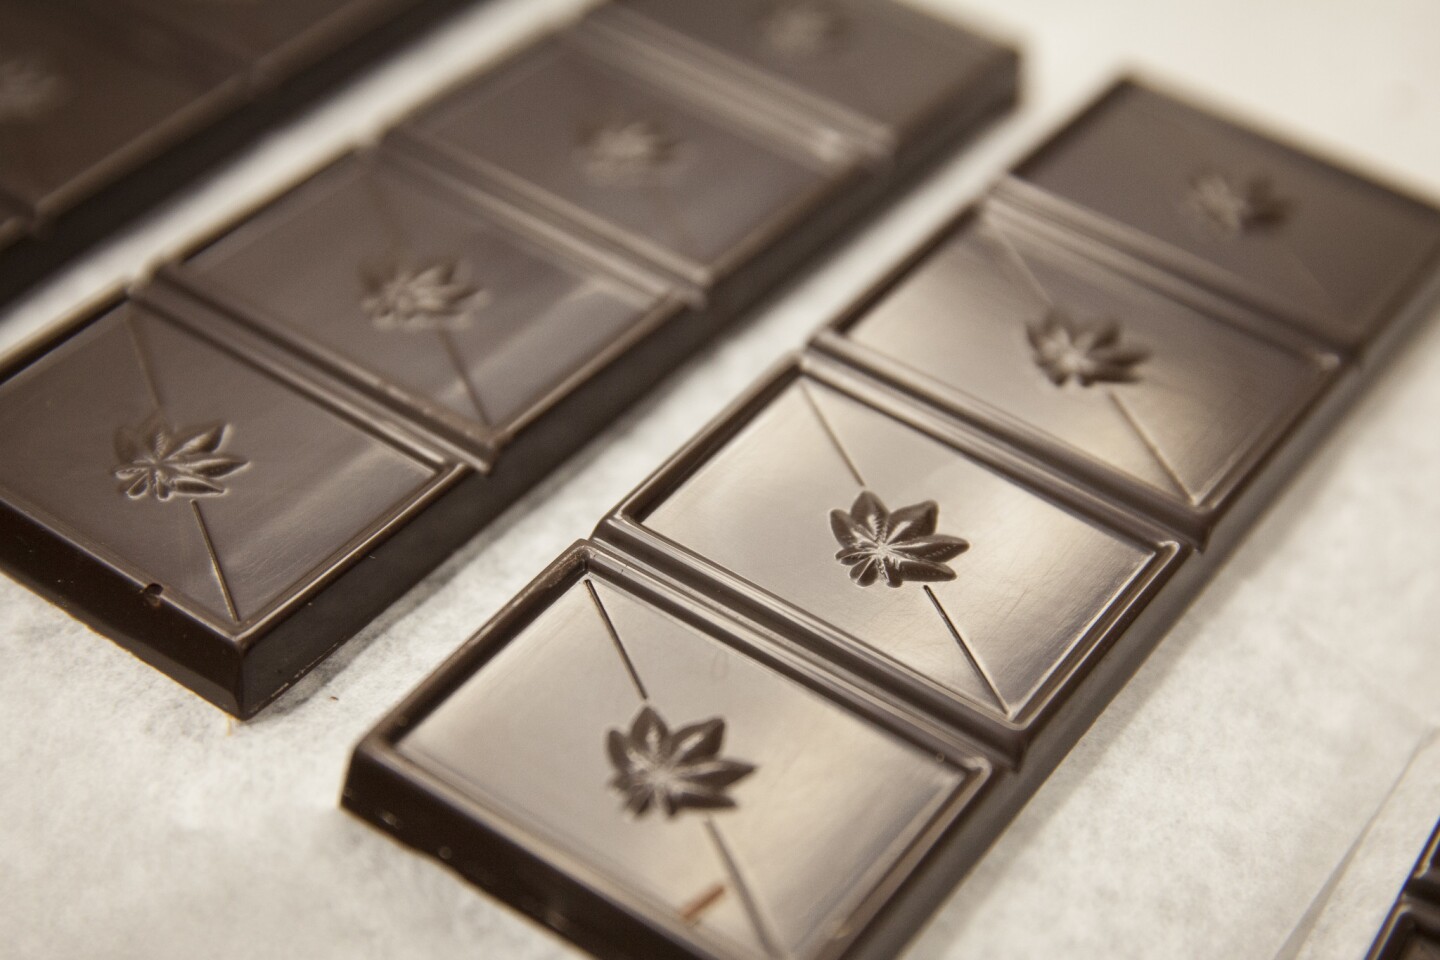 Edibles manufacturer Kiva Confections tests its hash for potency and impurities. It also tests the chocolate after it's been infused and samples of the finished porject.